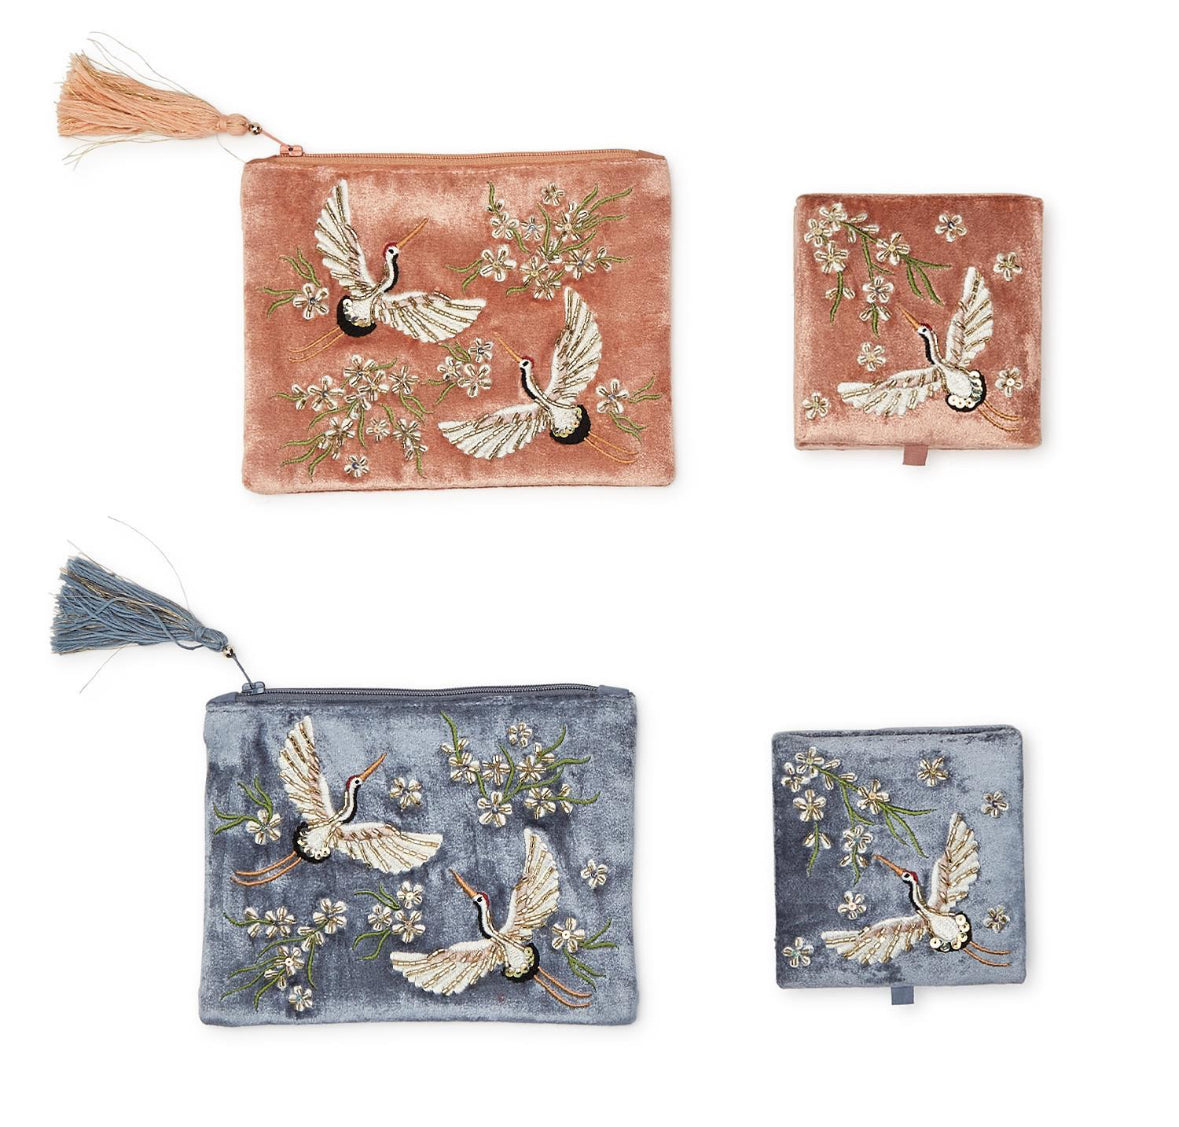 Two's Company - Heron Pouch and Box